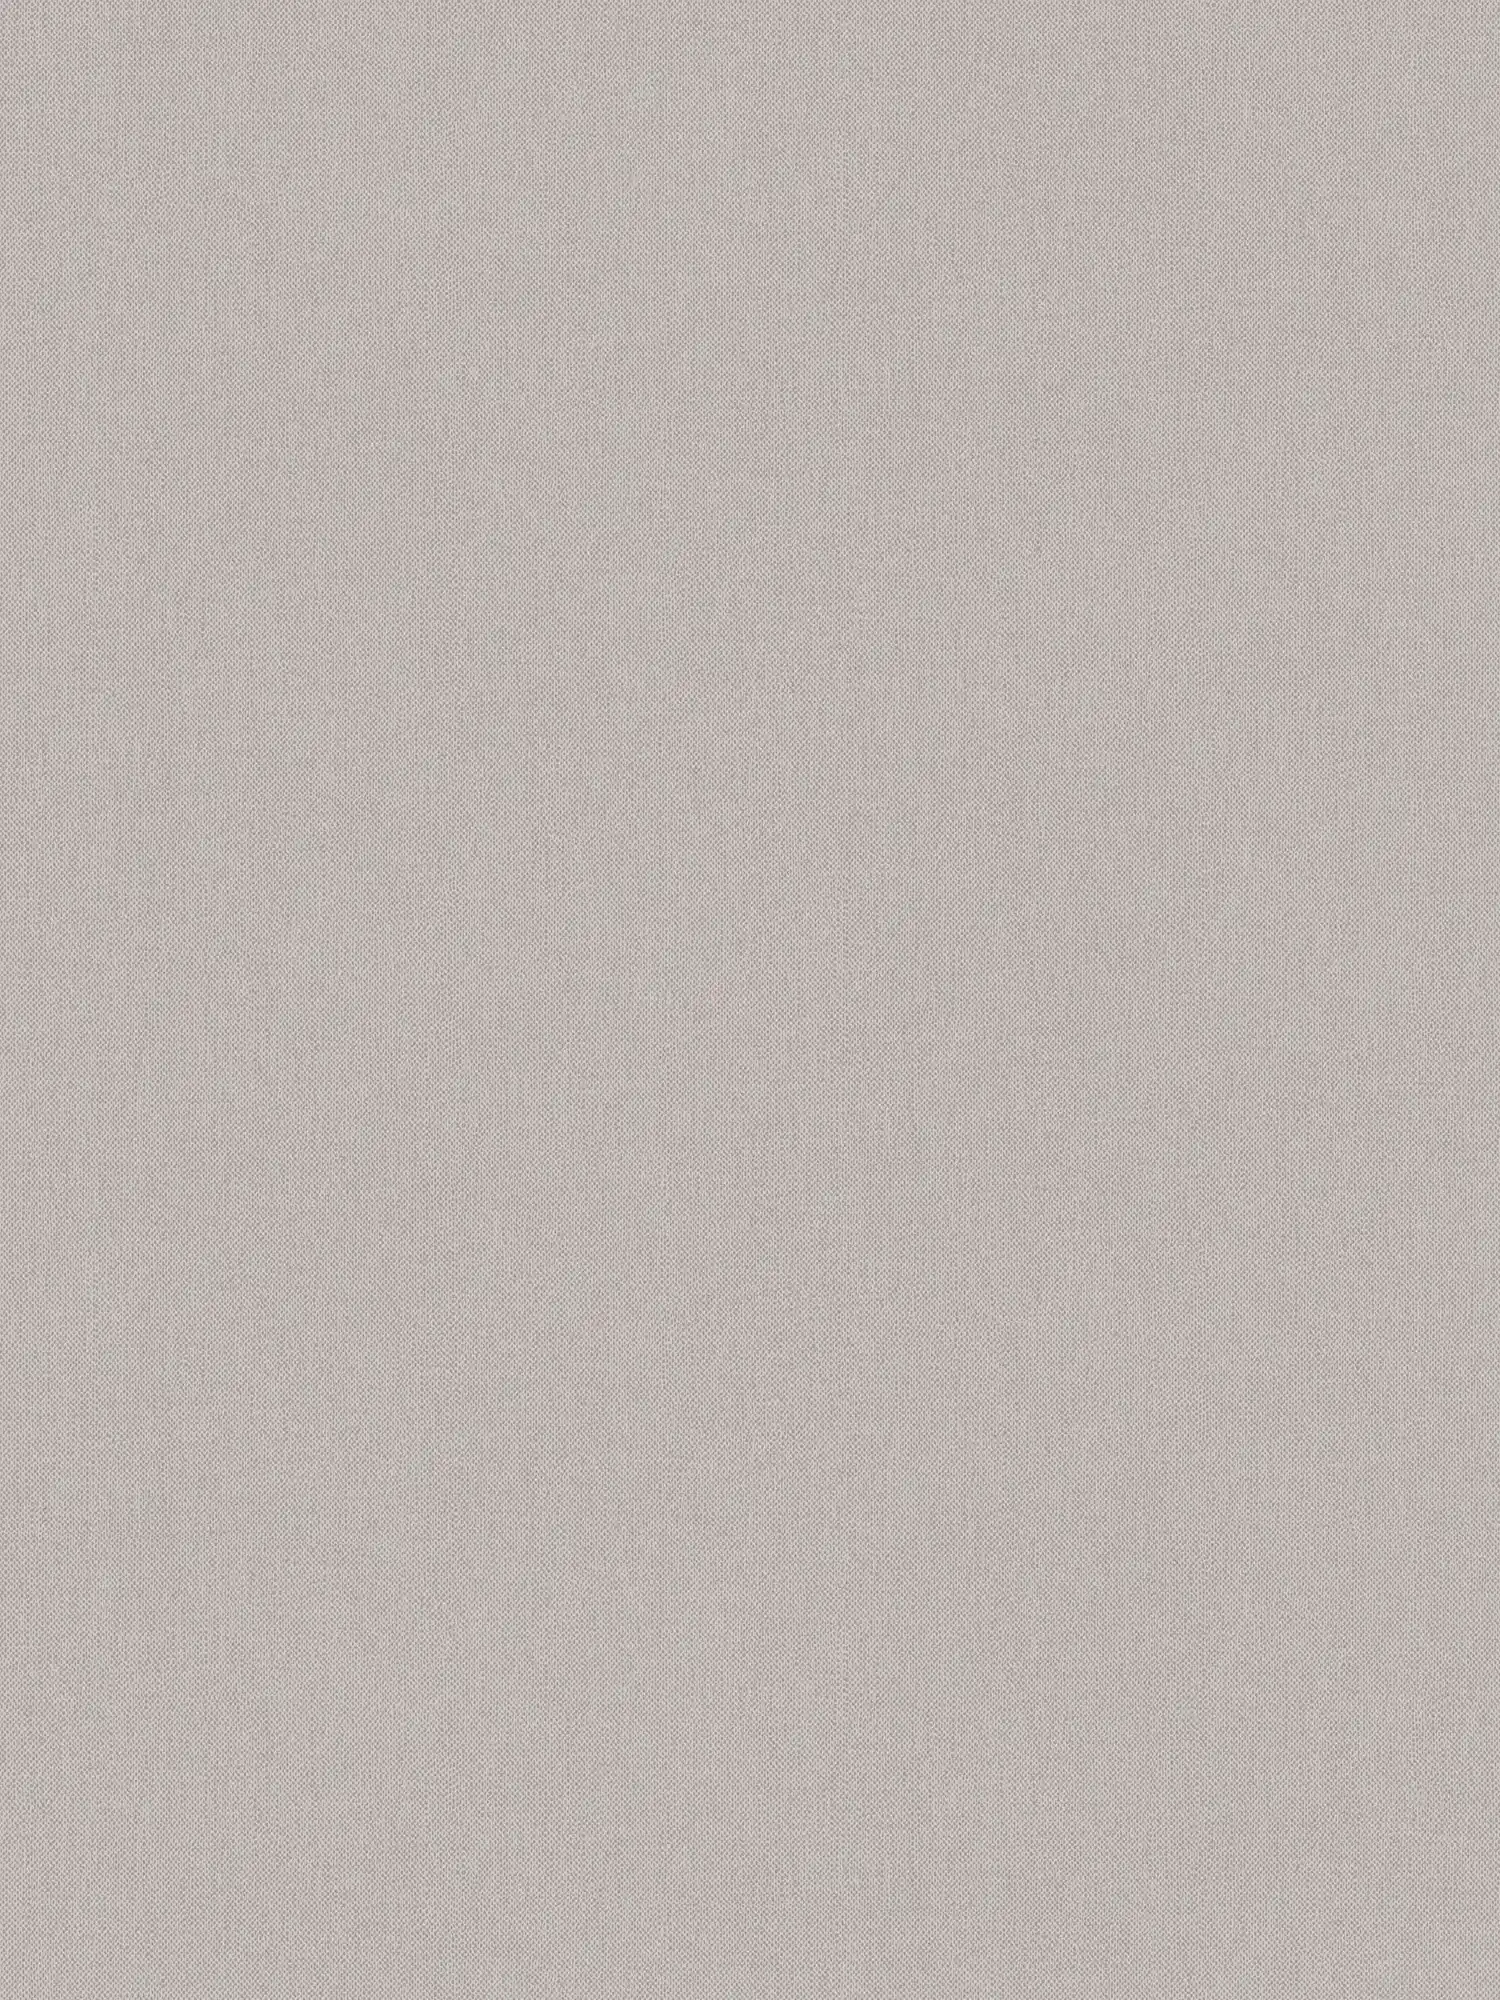 wallpaper taupe plain grey beige with textile look - grey, brown
